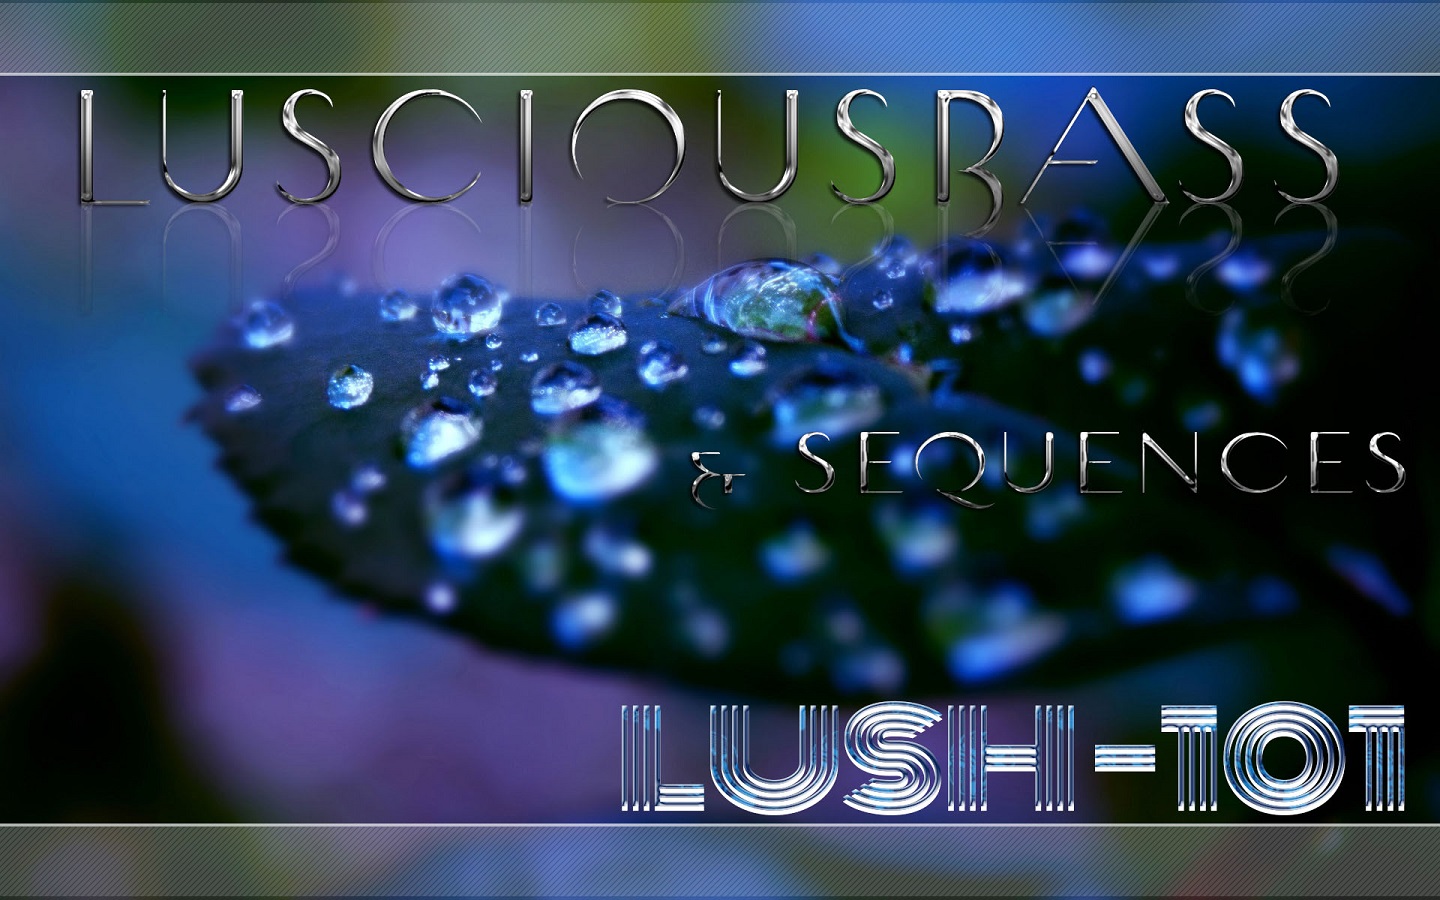 Luscious Bass & Sequences Soundset for LuSH-101